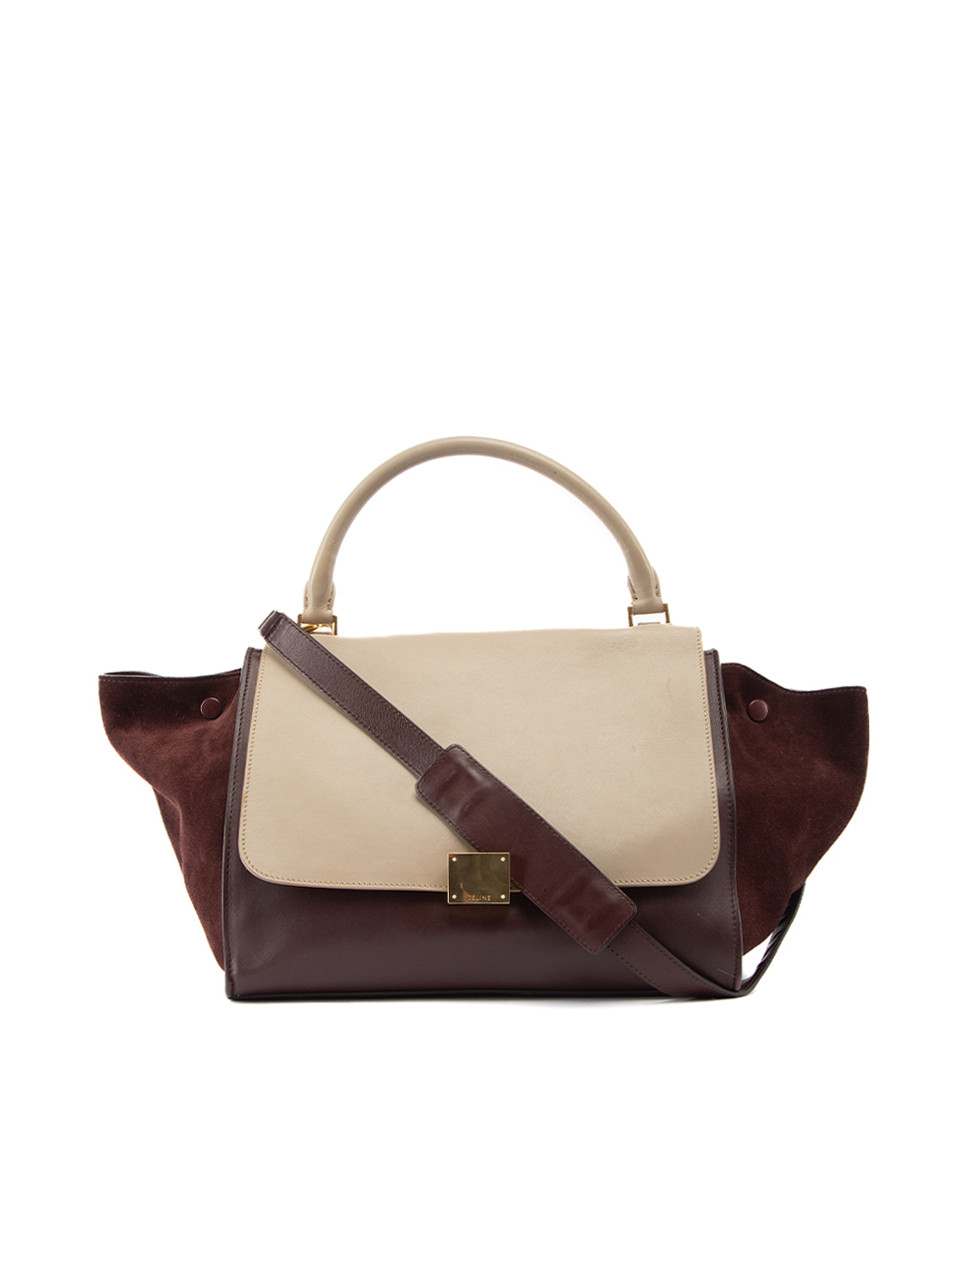 Image of Beige & Burgundy Trapeze Bag Leather & Suede